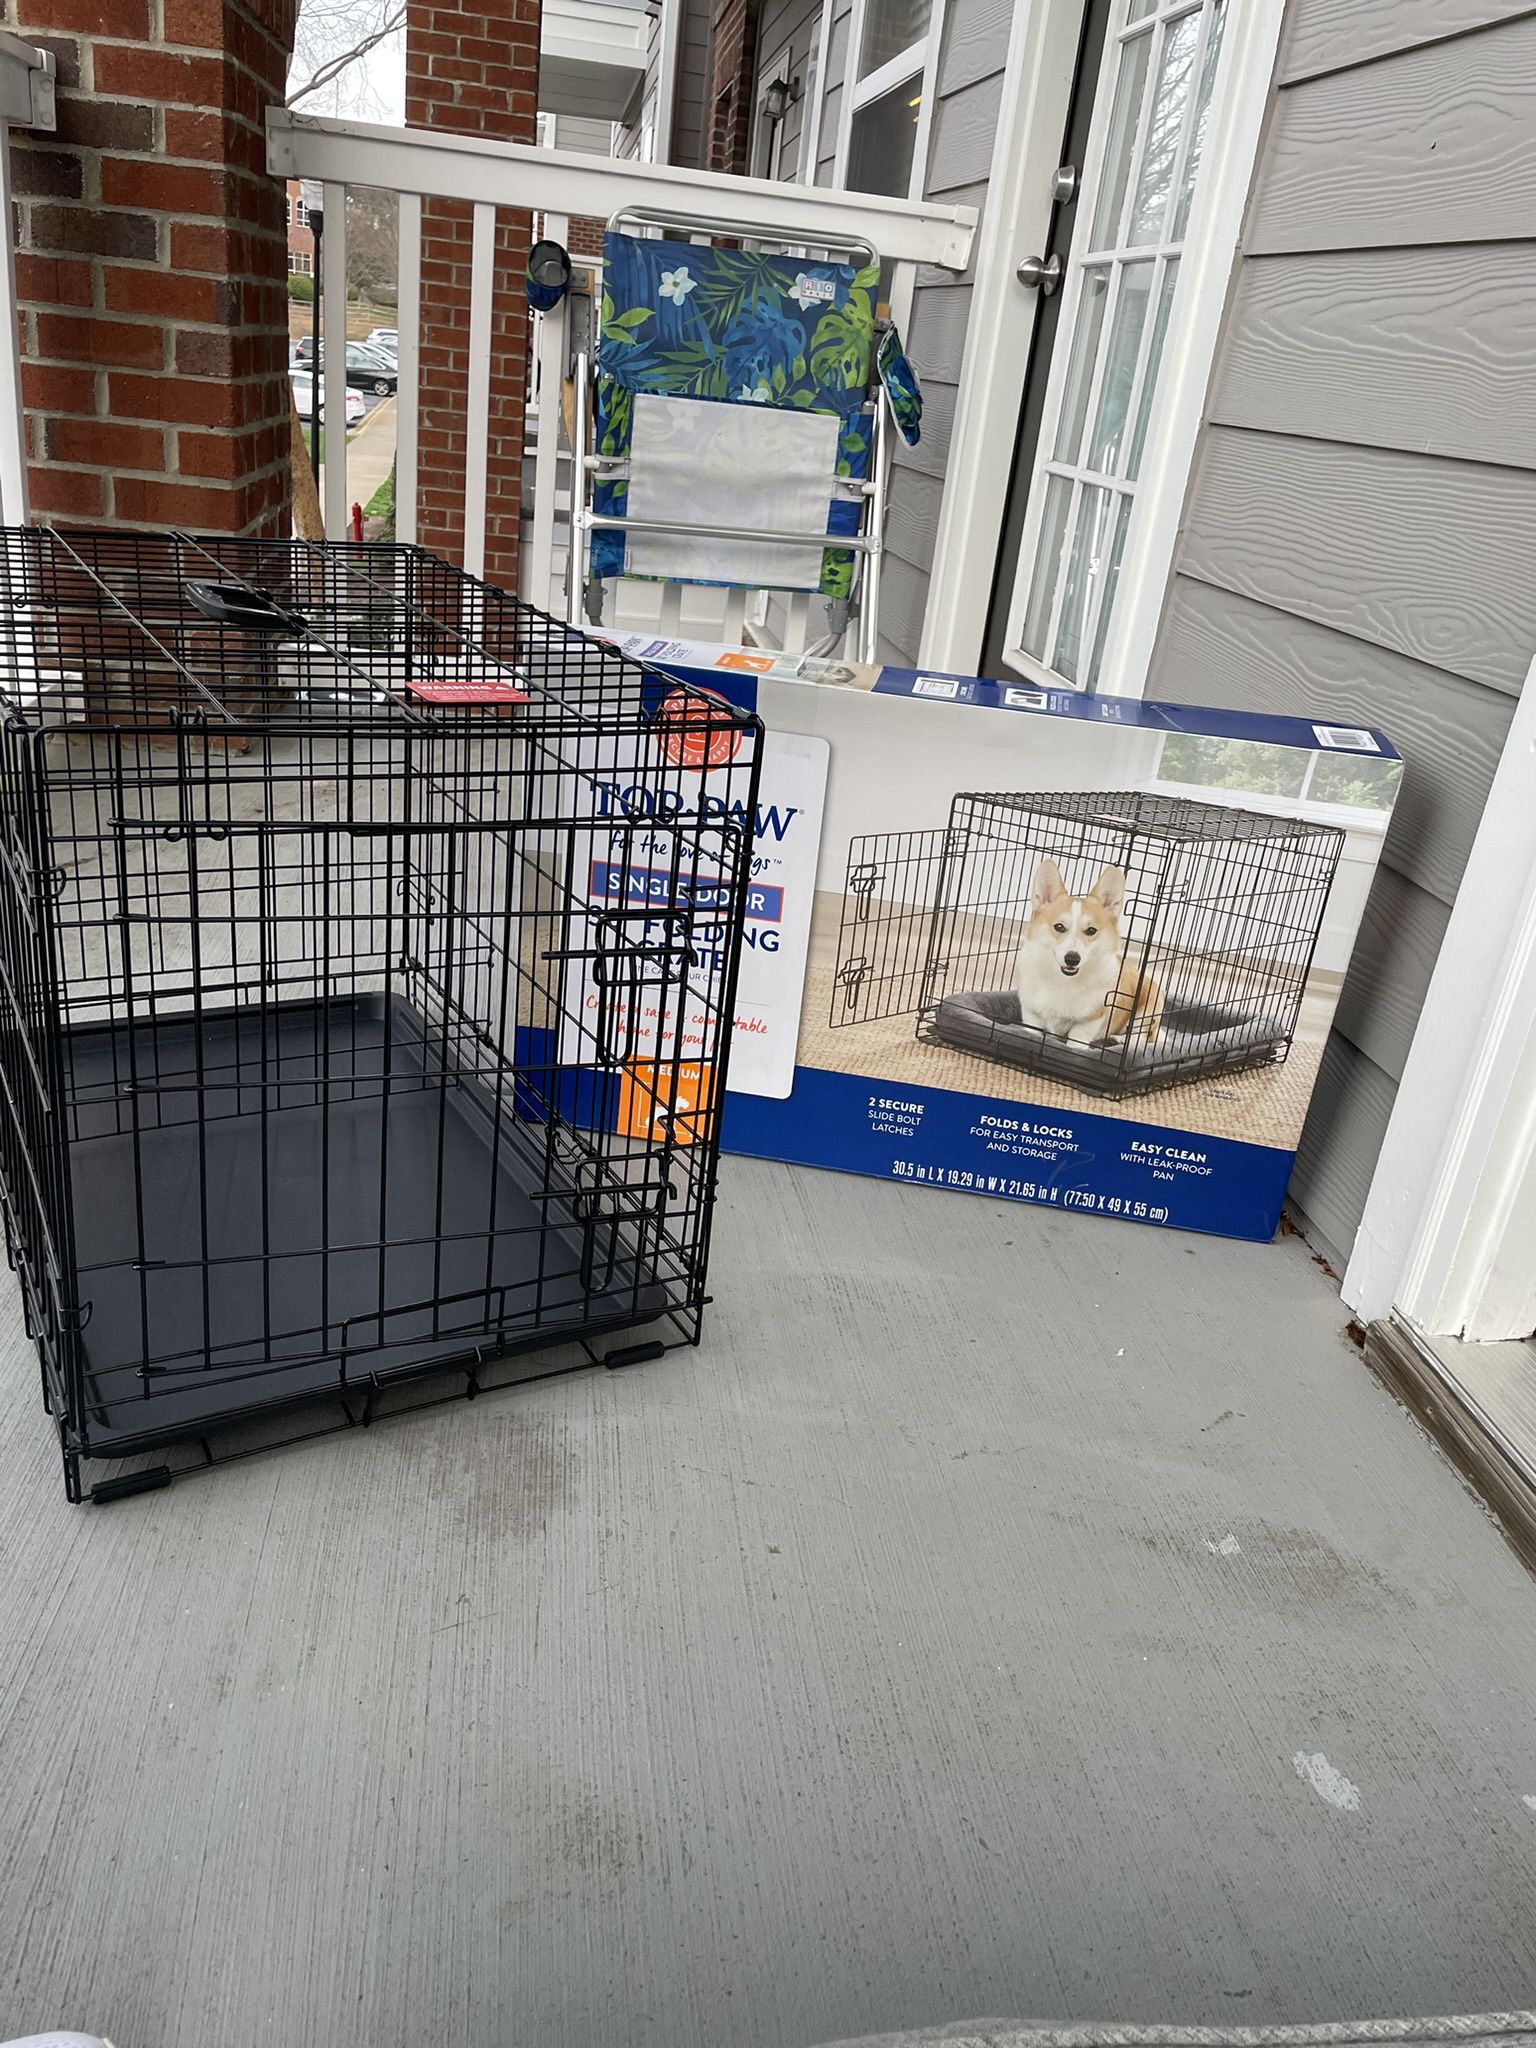 Puppy Supplies: Dog Crate, Dog Bed, Food Bowls